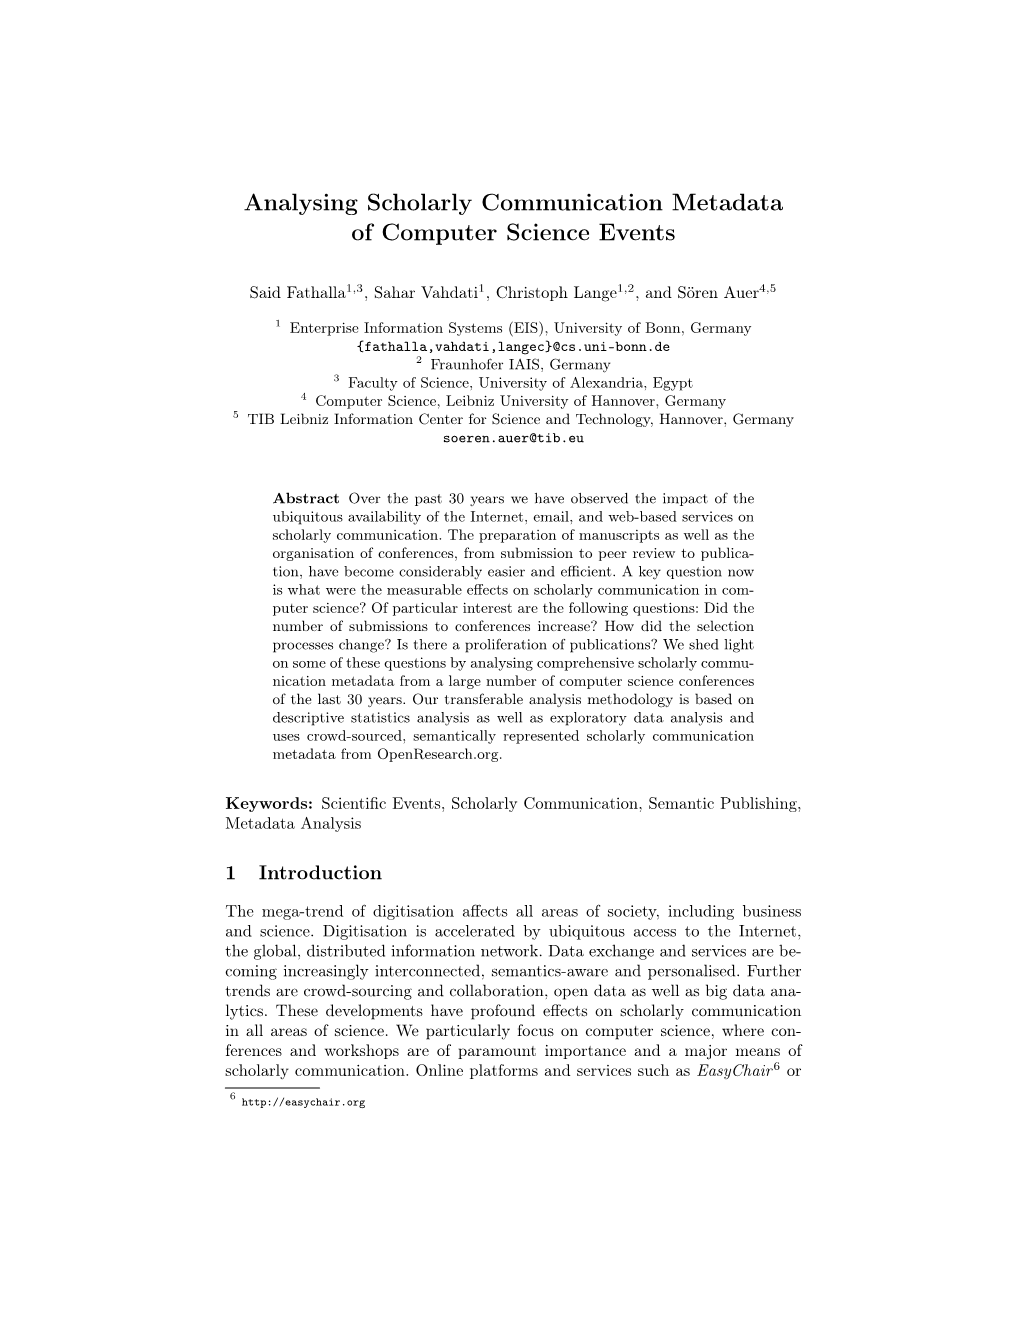 Analysing Scholarly Communication Metadata of Computer Science Events